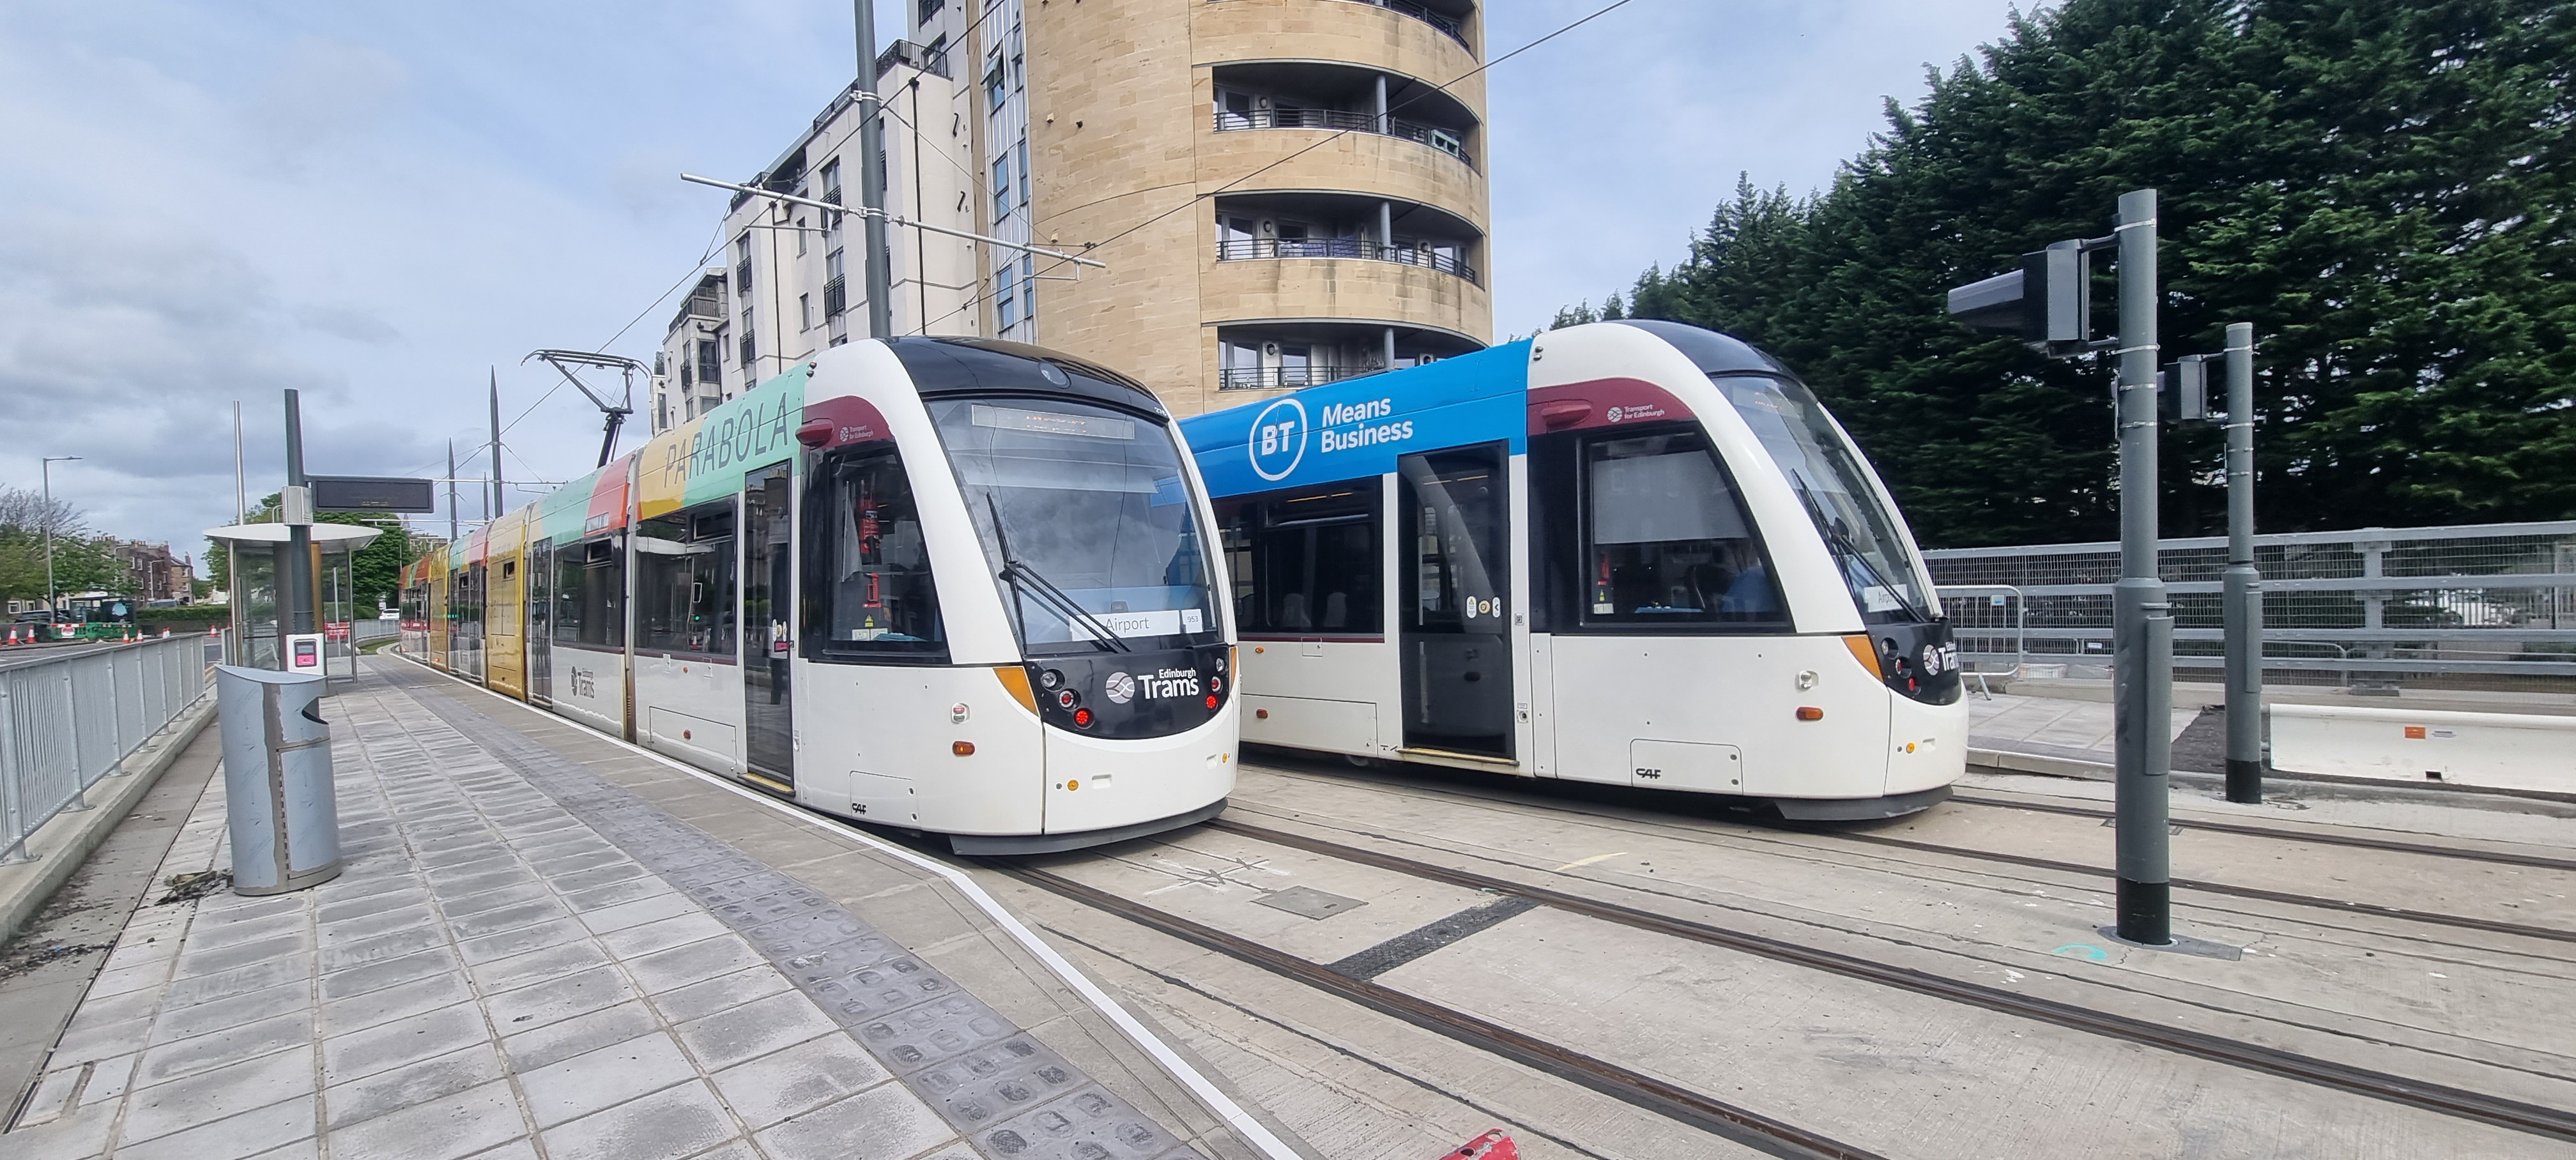 Passengers to embark on Trams to Newhaven for first time next week